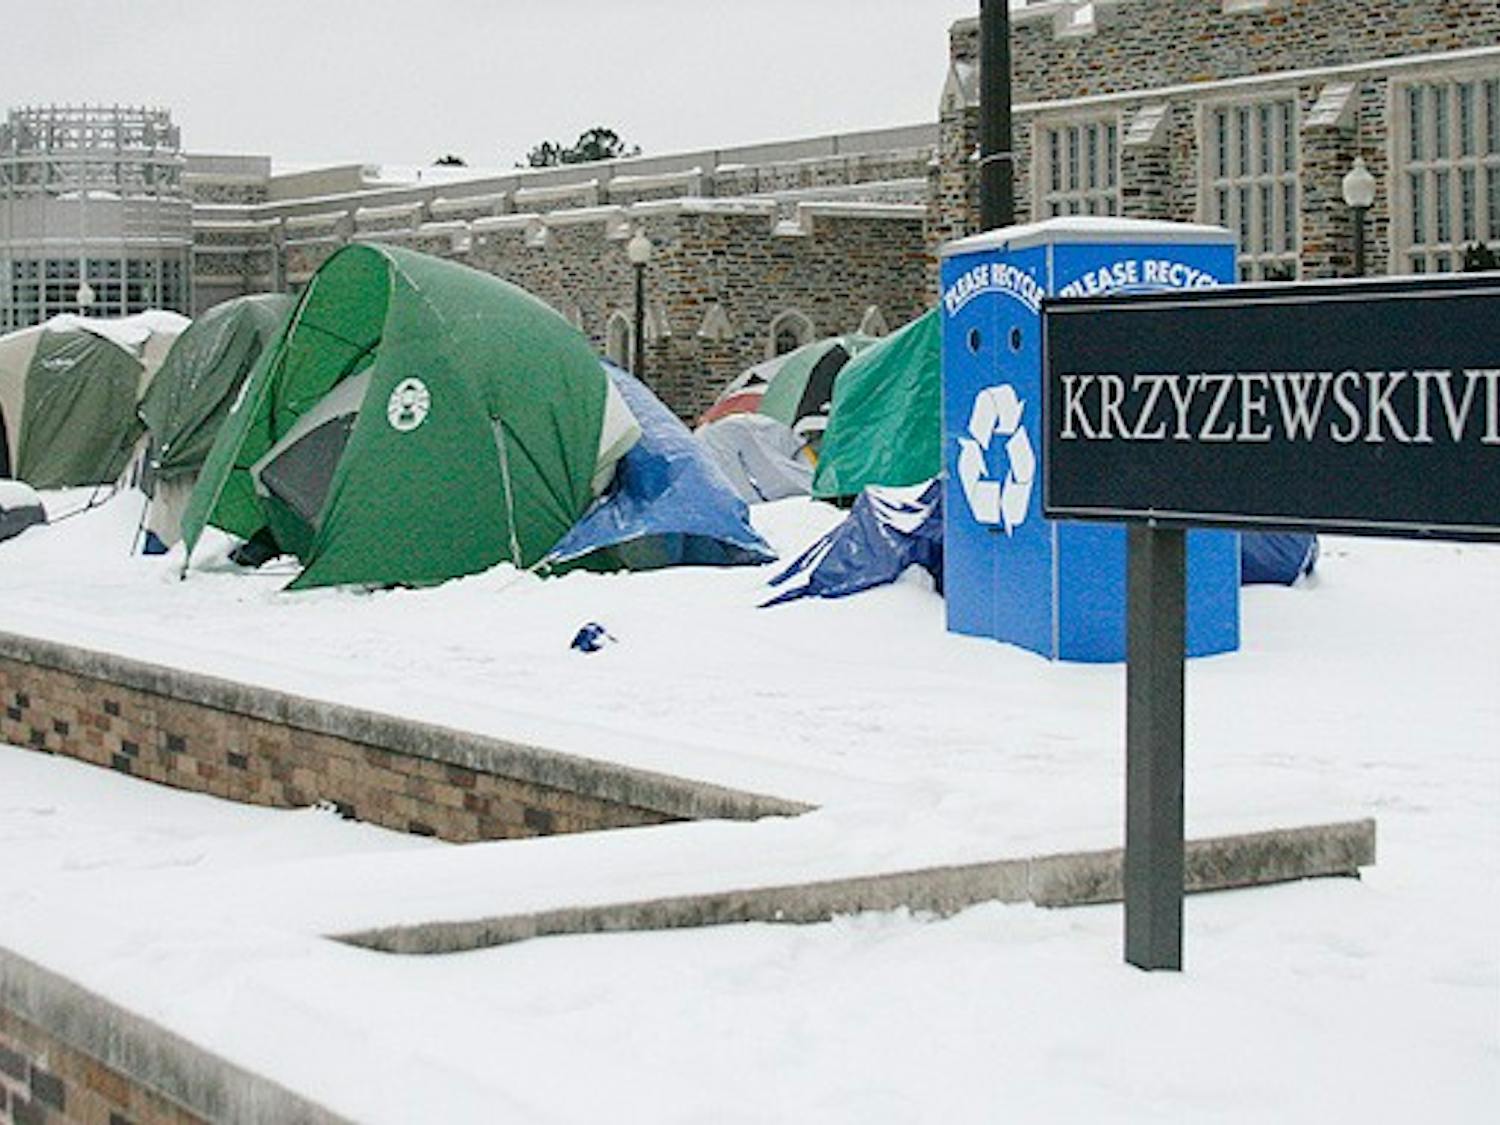 Some students said the social aspect of Krzyzewskiville this year was lacking after a snowstorm forced cancellations of several kickoff events, but added that tenting seemed easier this year compared to the past.